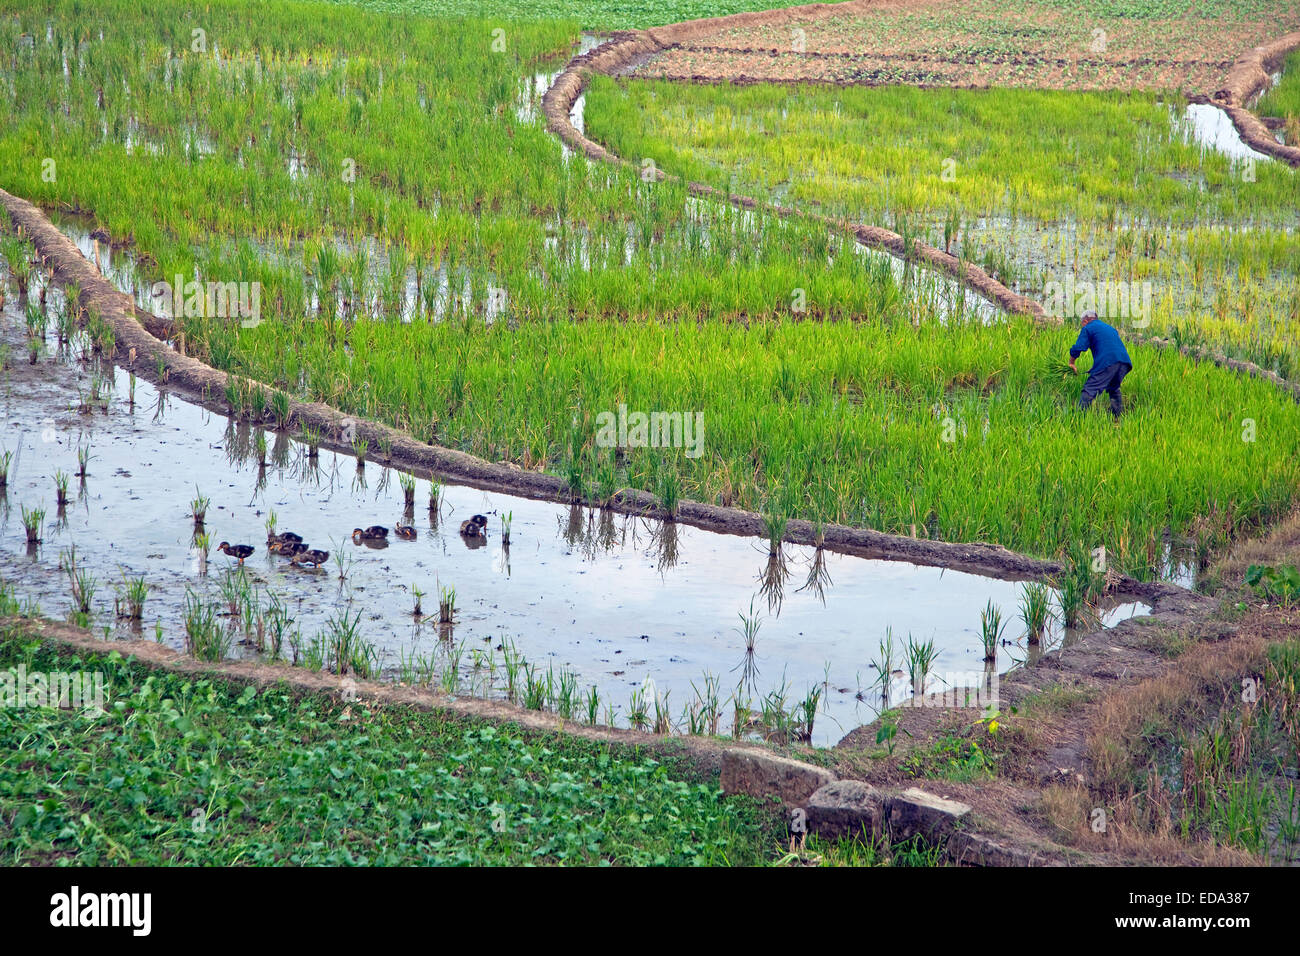 Tibetan man cutting rice plants in paddy field in the lowlands of the Sichuan province, China Stock Photo